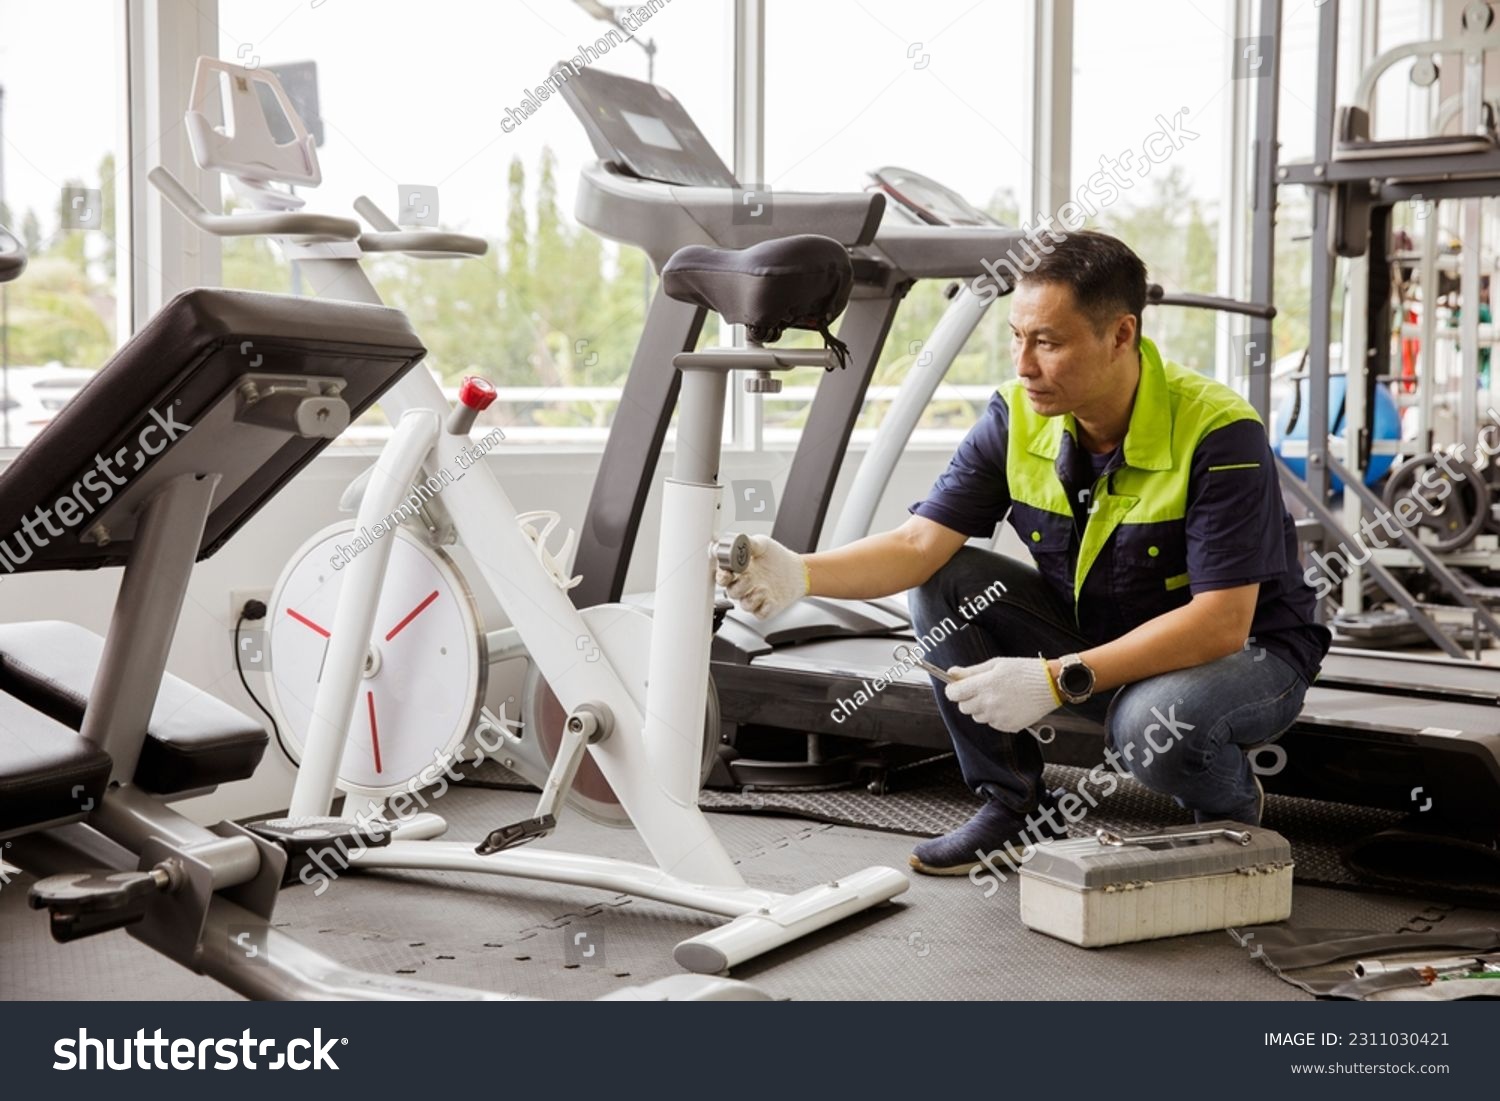 Professional asian male service repair worker or sport fitter using bicycle and treadmill service equipment supervising and securing fitness equipment in indoor gym provide security safety for users. #2311030421